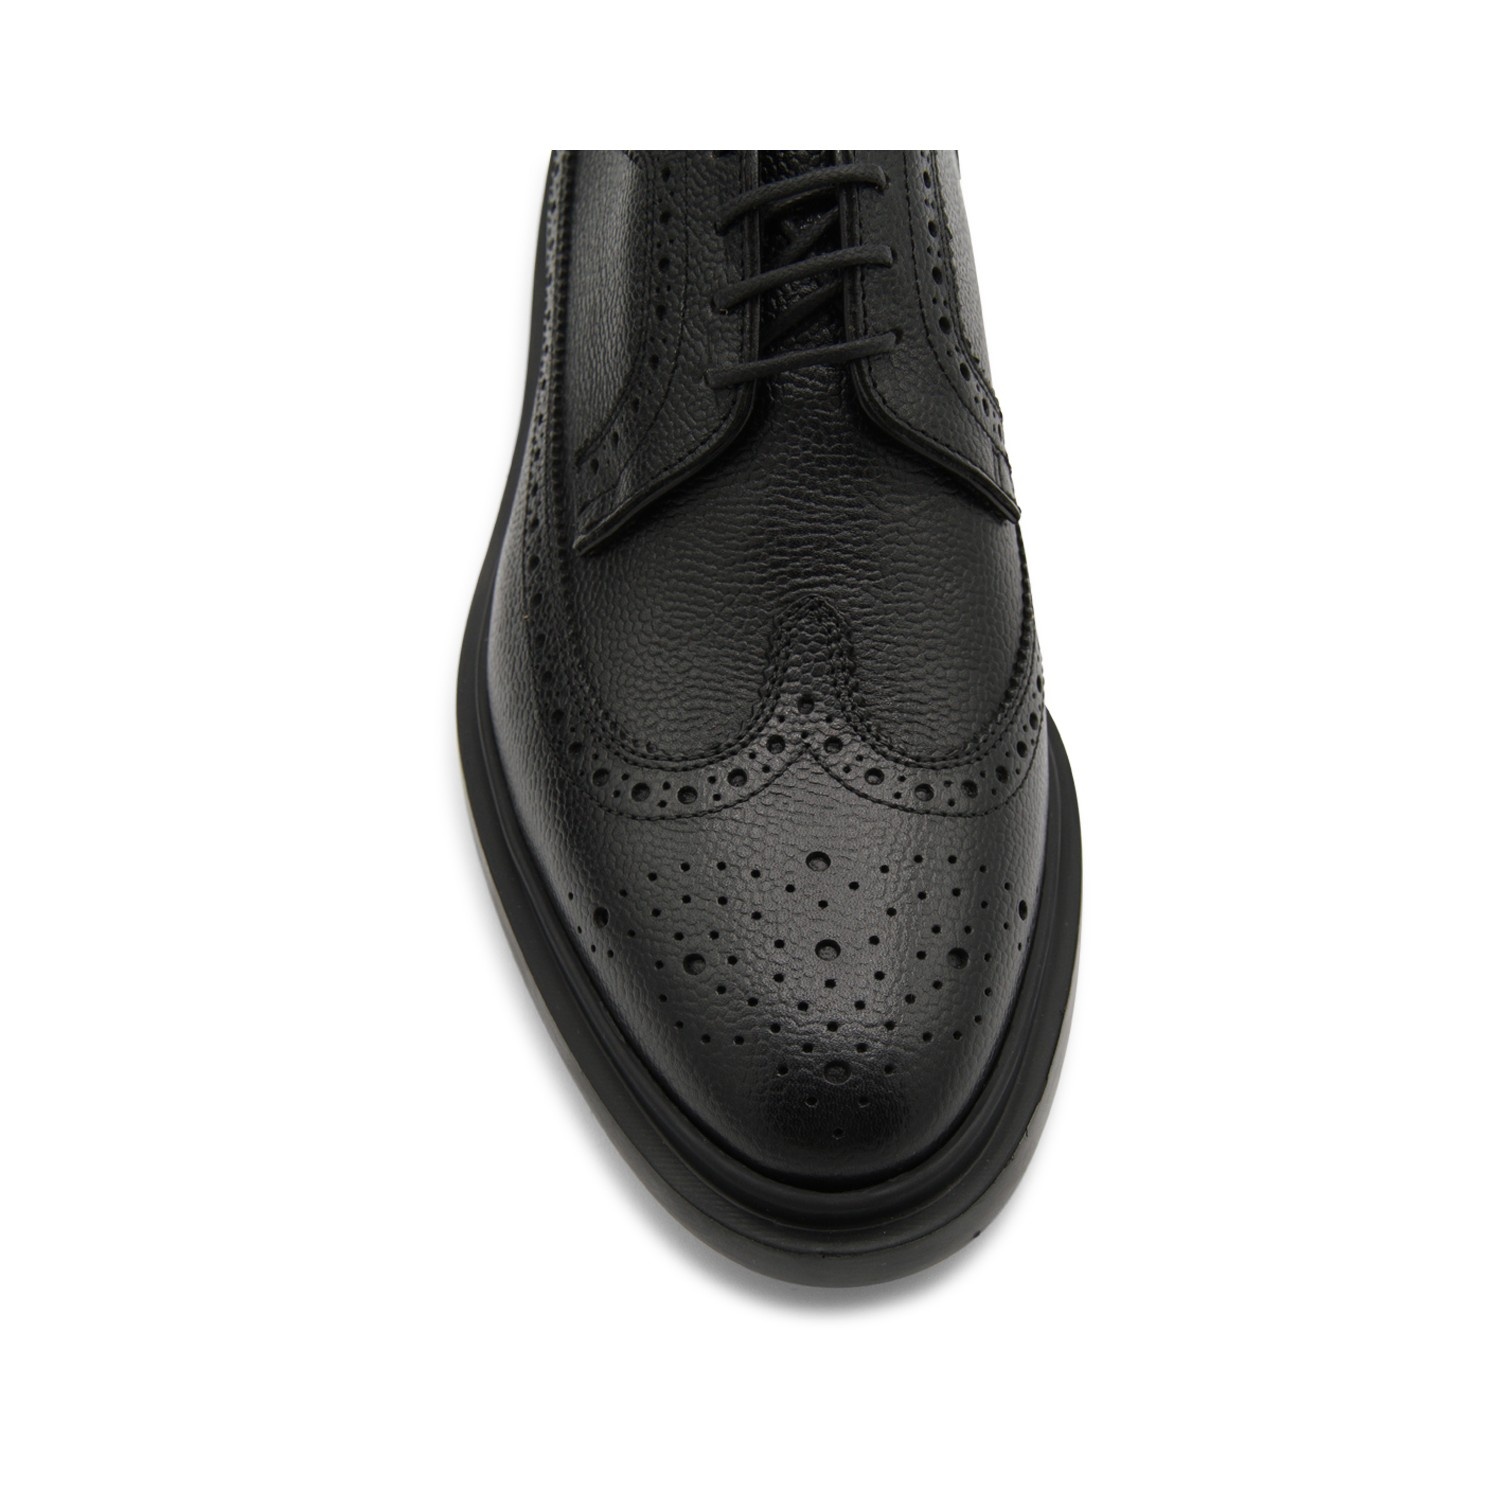 BLACK LEATHER LONGWING BROGUES - 4